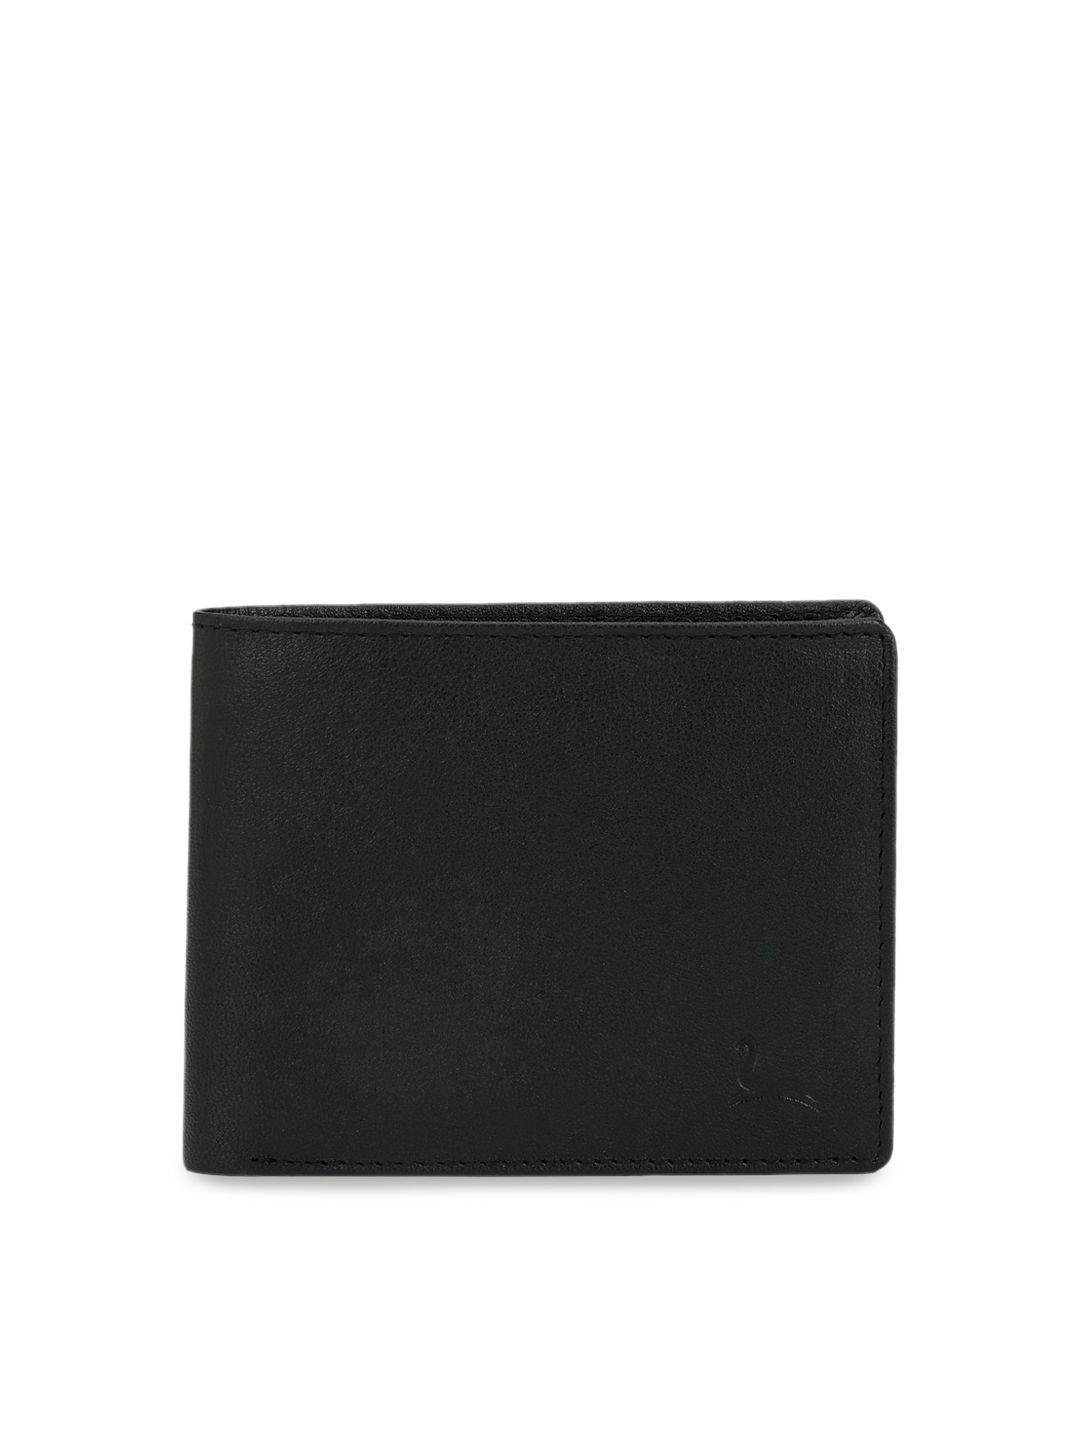 pacific gold men black solid genuine leather two fold wallet